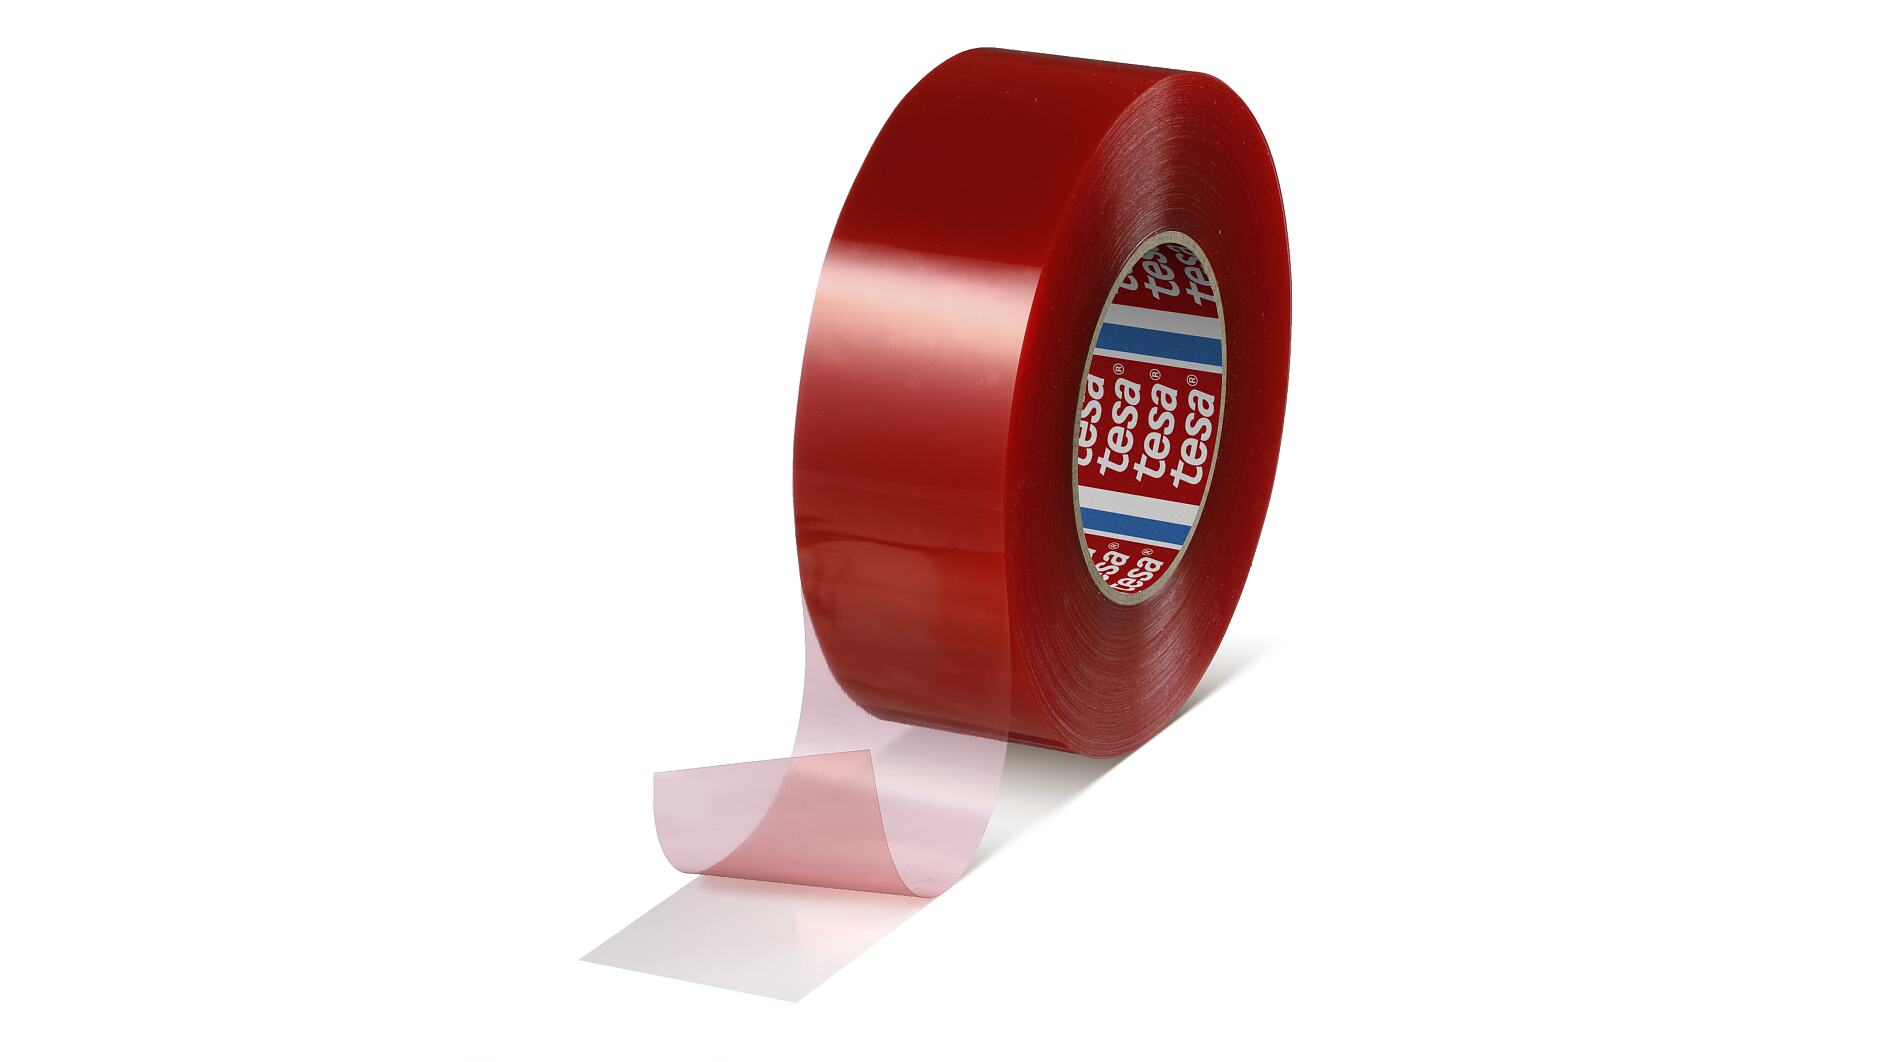 50M Super Strong Double Sided Adhesive Tape Ultra-thin PET High-adhesive  Tapes Plastic/Electronics/DIY Craft Adhesive 5mm-50mm